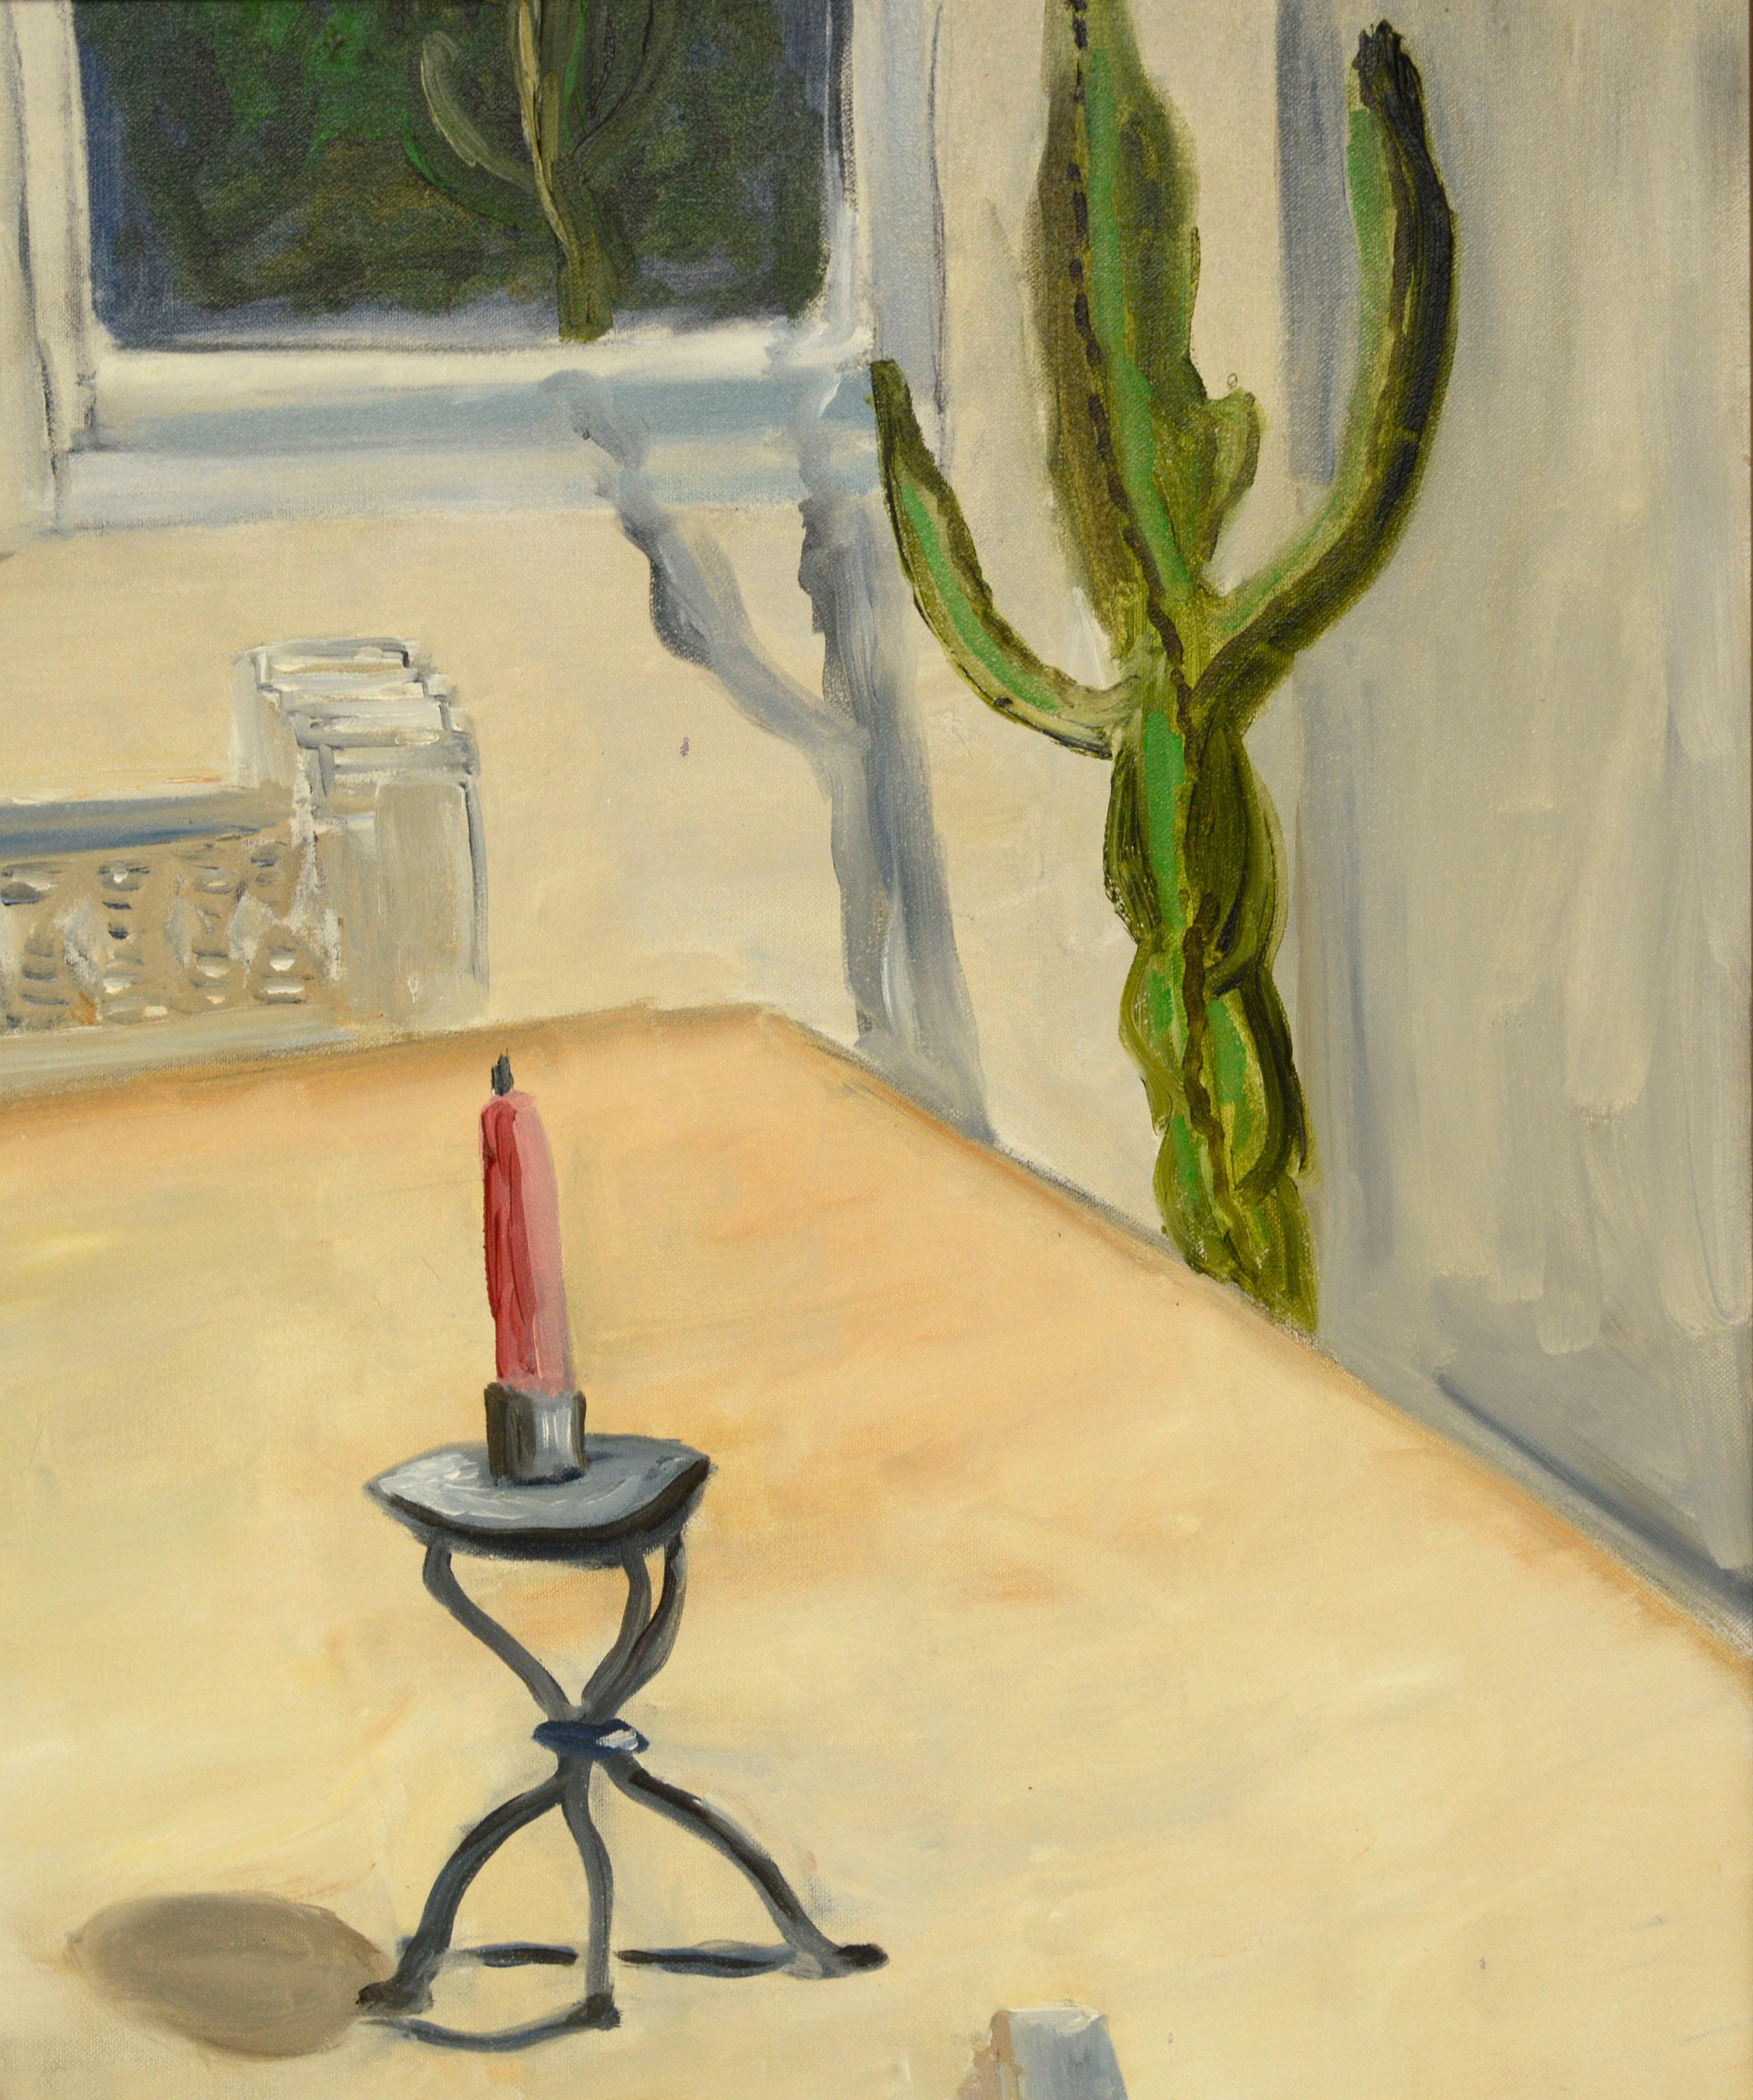 Large-Scale Interior Dining Room Table Still-Life with Pears, Candles, & Cactus  - Contemporary Painting by Unknown